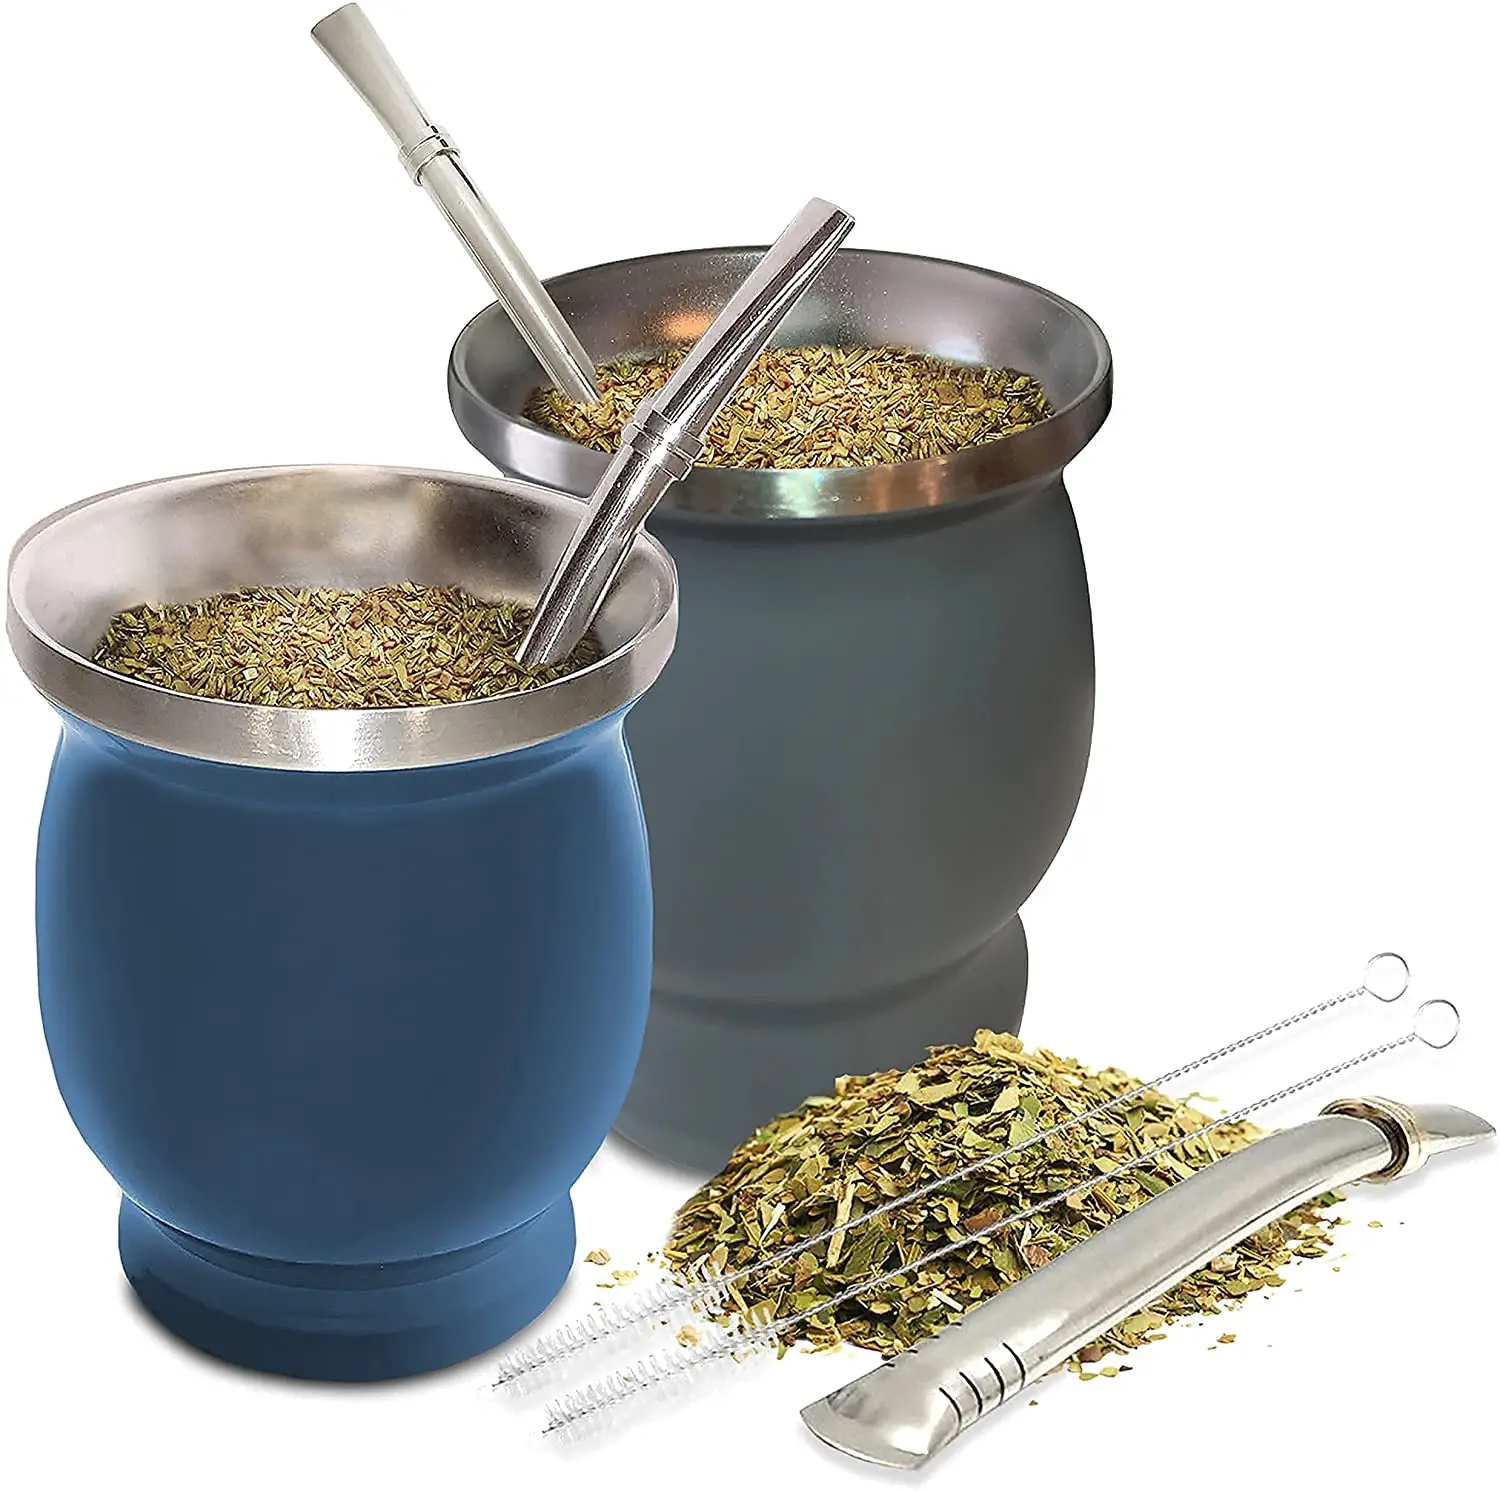 BALIBETOV 5 pcs large Yerba Mate Cup and Bombilla Kit, Includes one 12 oz  Yerba Mate Gourd with Lid, Two Bombillas Mate Straw and one cleaning brush  